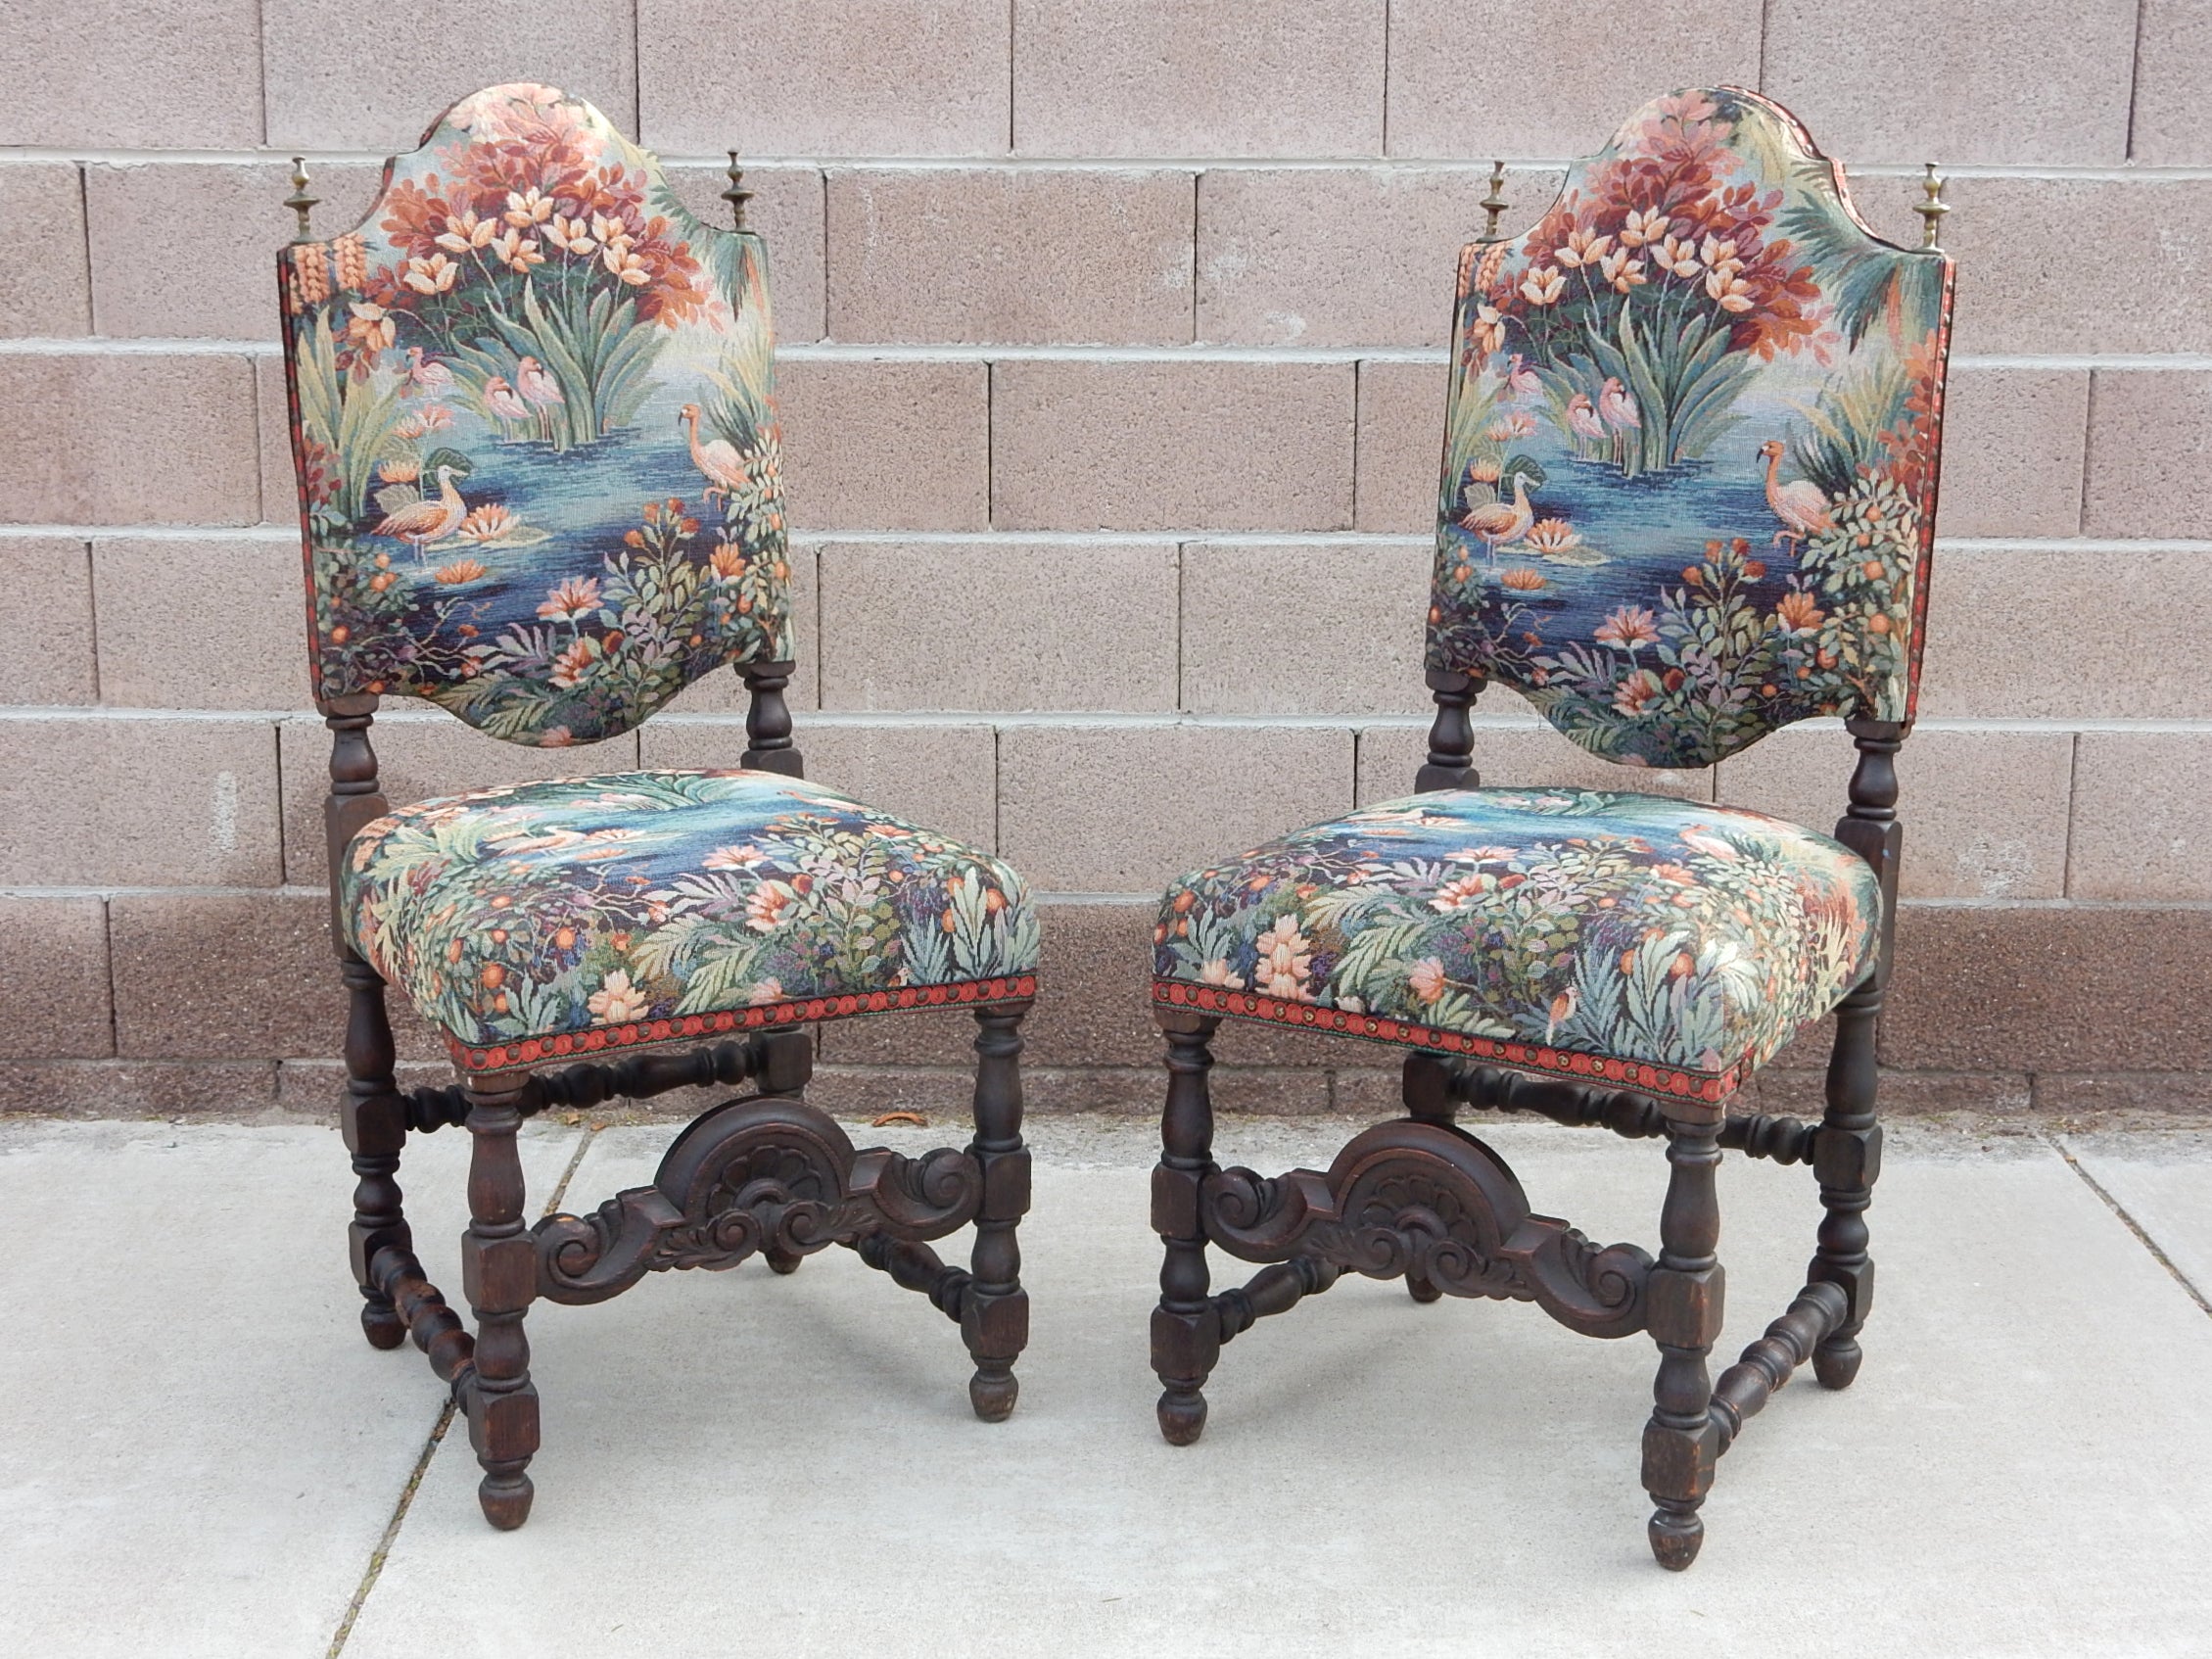 1940's Spanish Colonial Revival Chairs Dressed in Flamingo Garden Upholstery 4